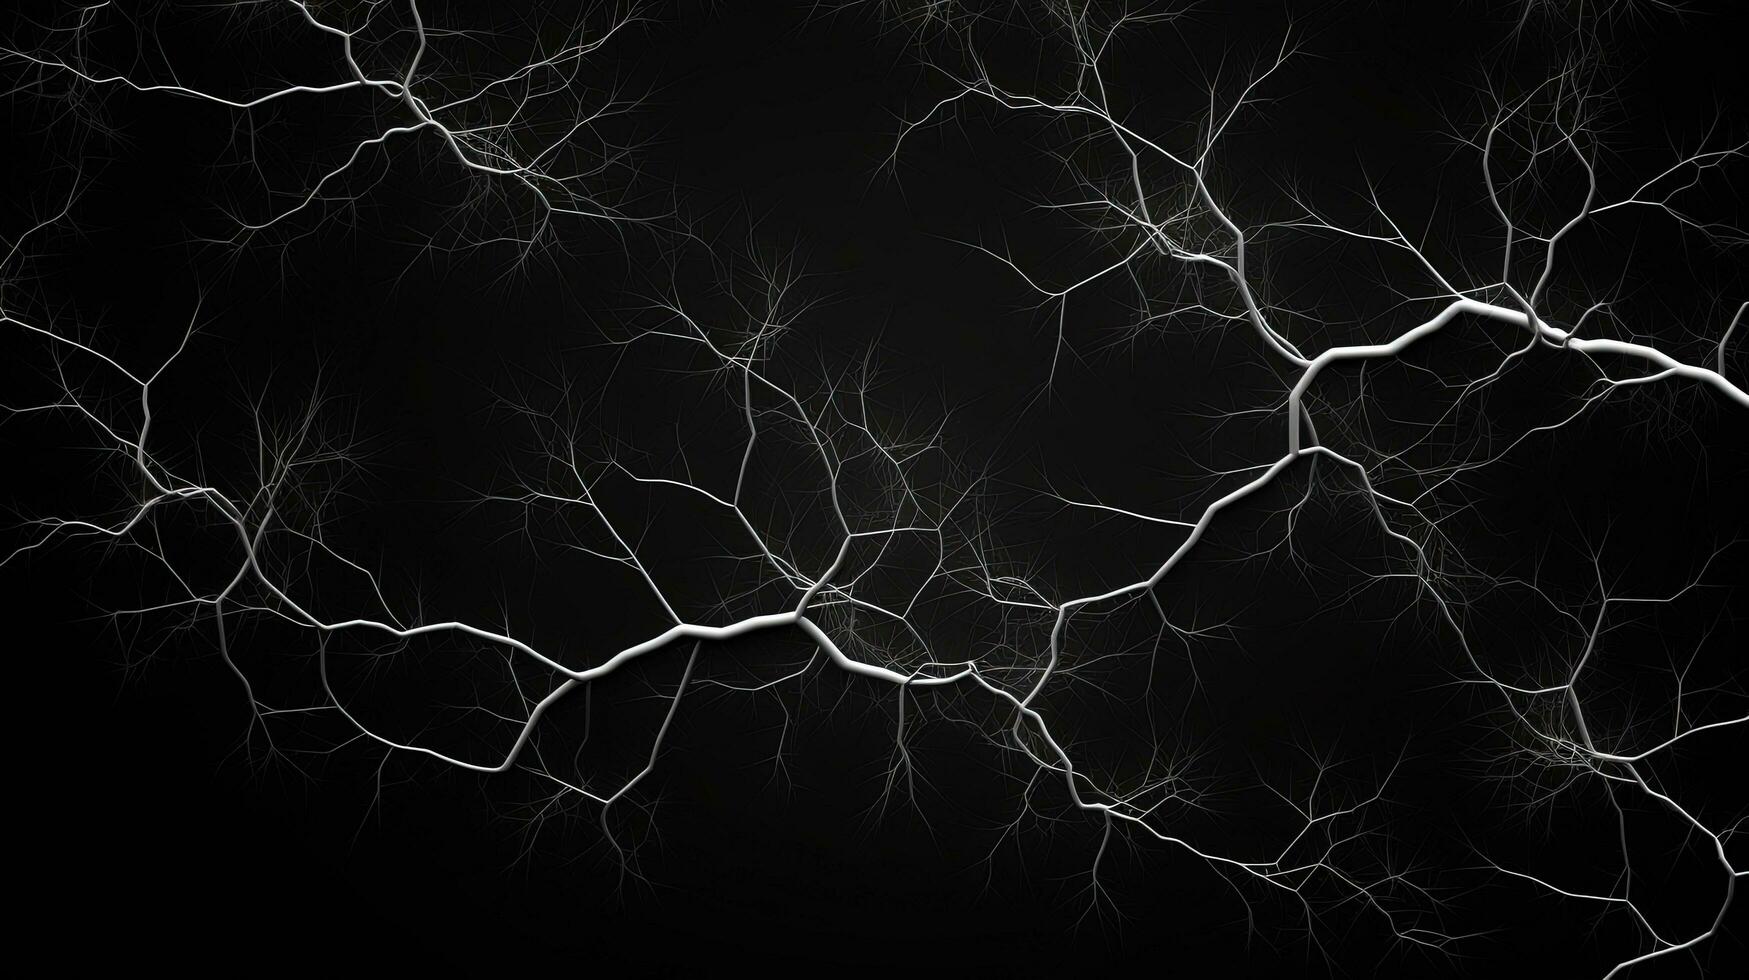 Black background with white branches forming an abstract representation. silhouette concept photo